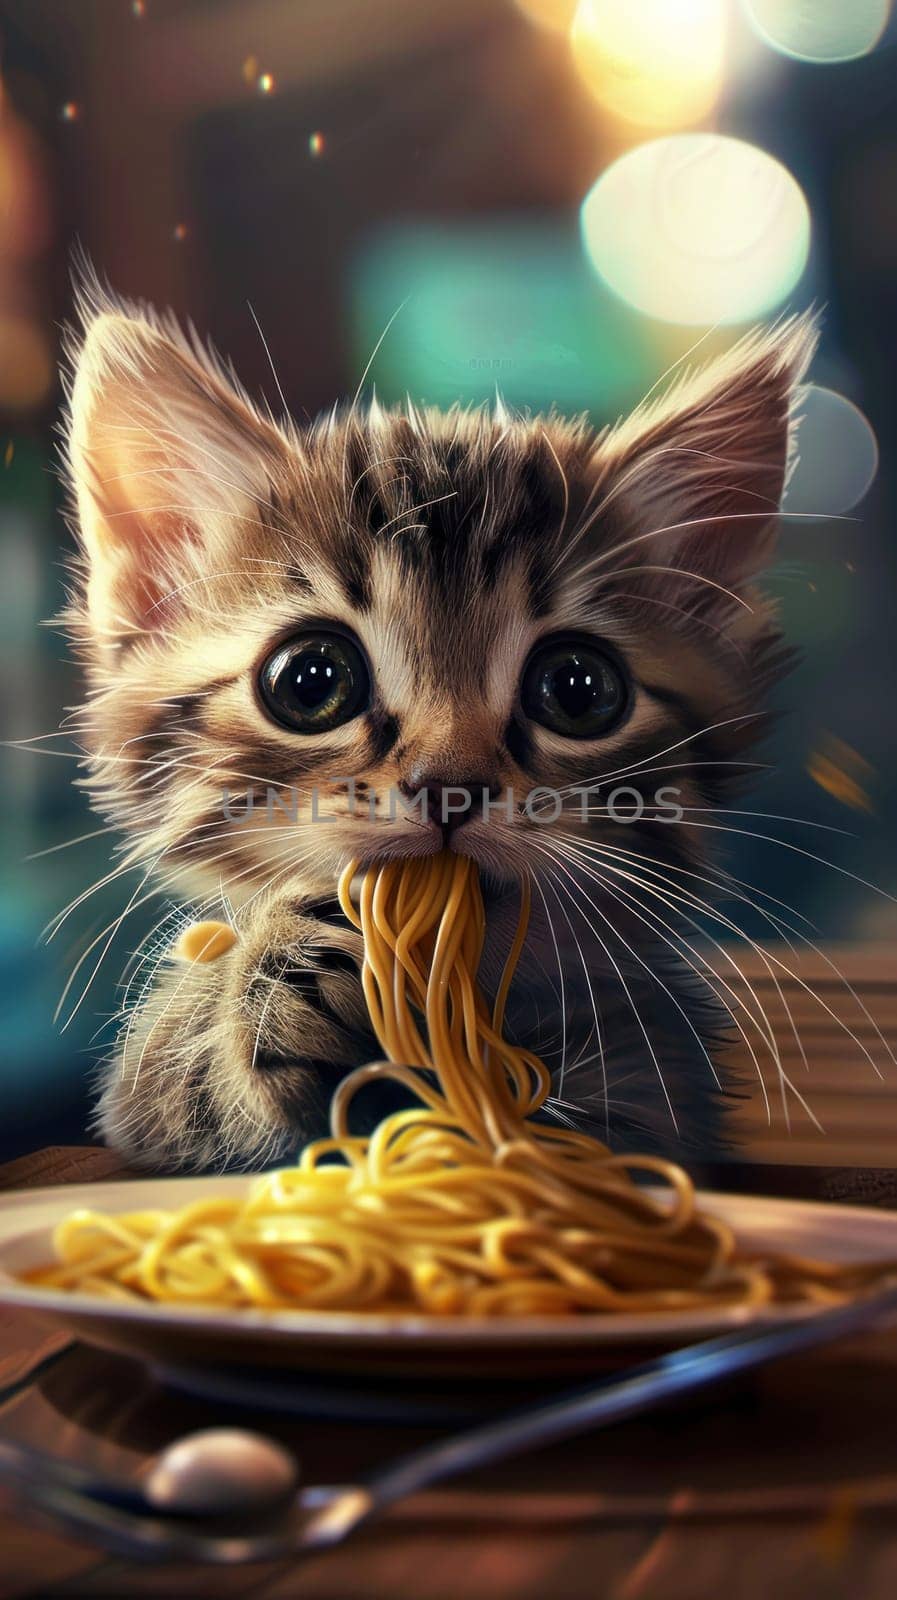 A cat is eating spaghetti on a plate by golfmerrymaker